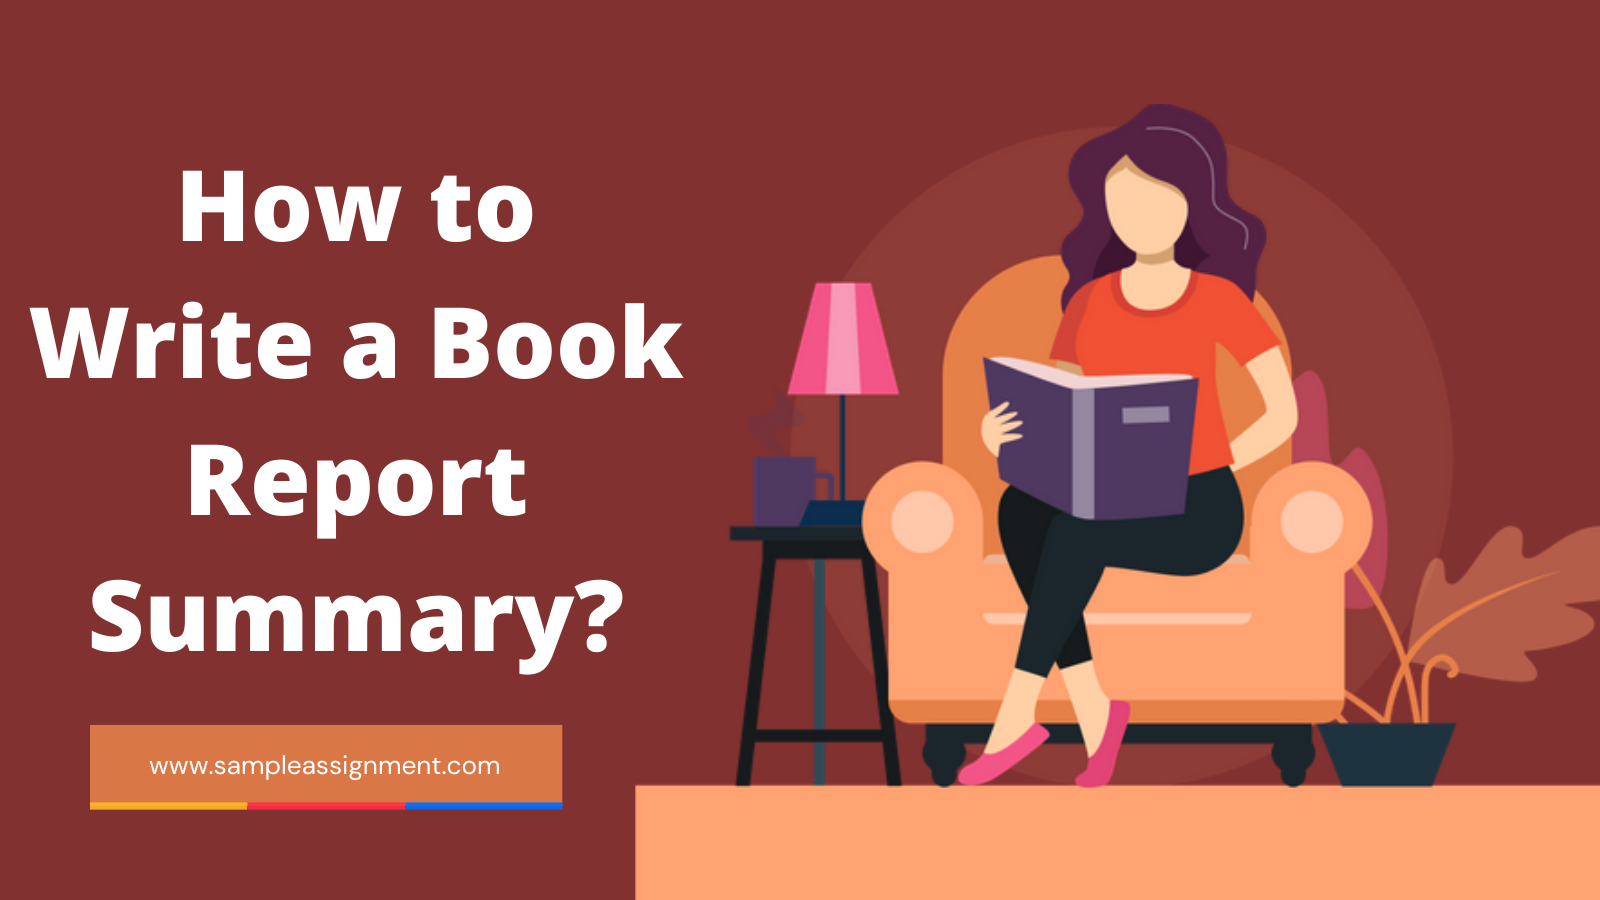 How To Write A Book Report Summary?